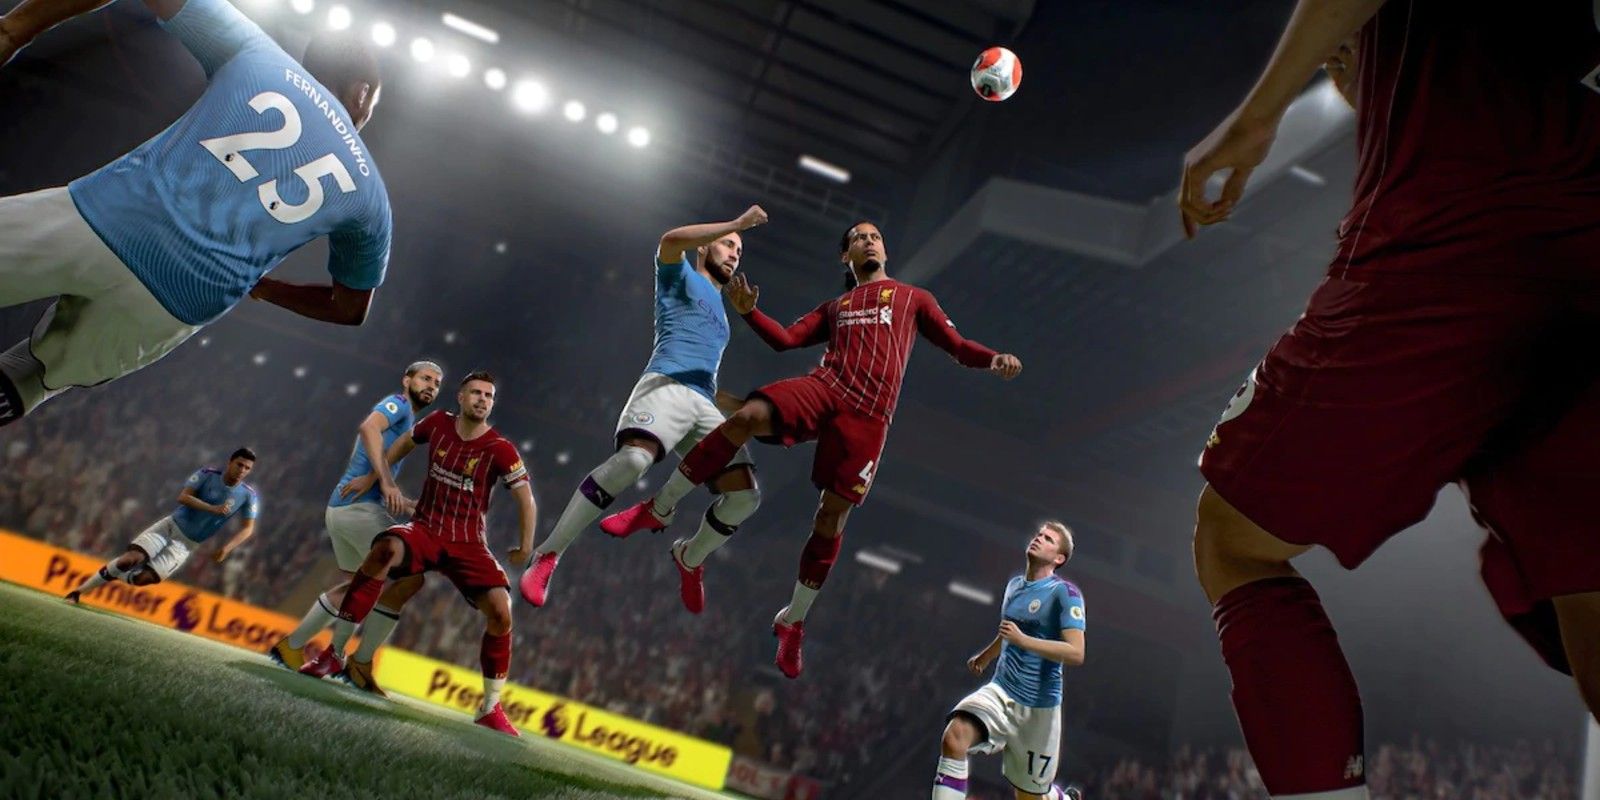 A player heads the ball in FIFA 21